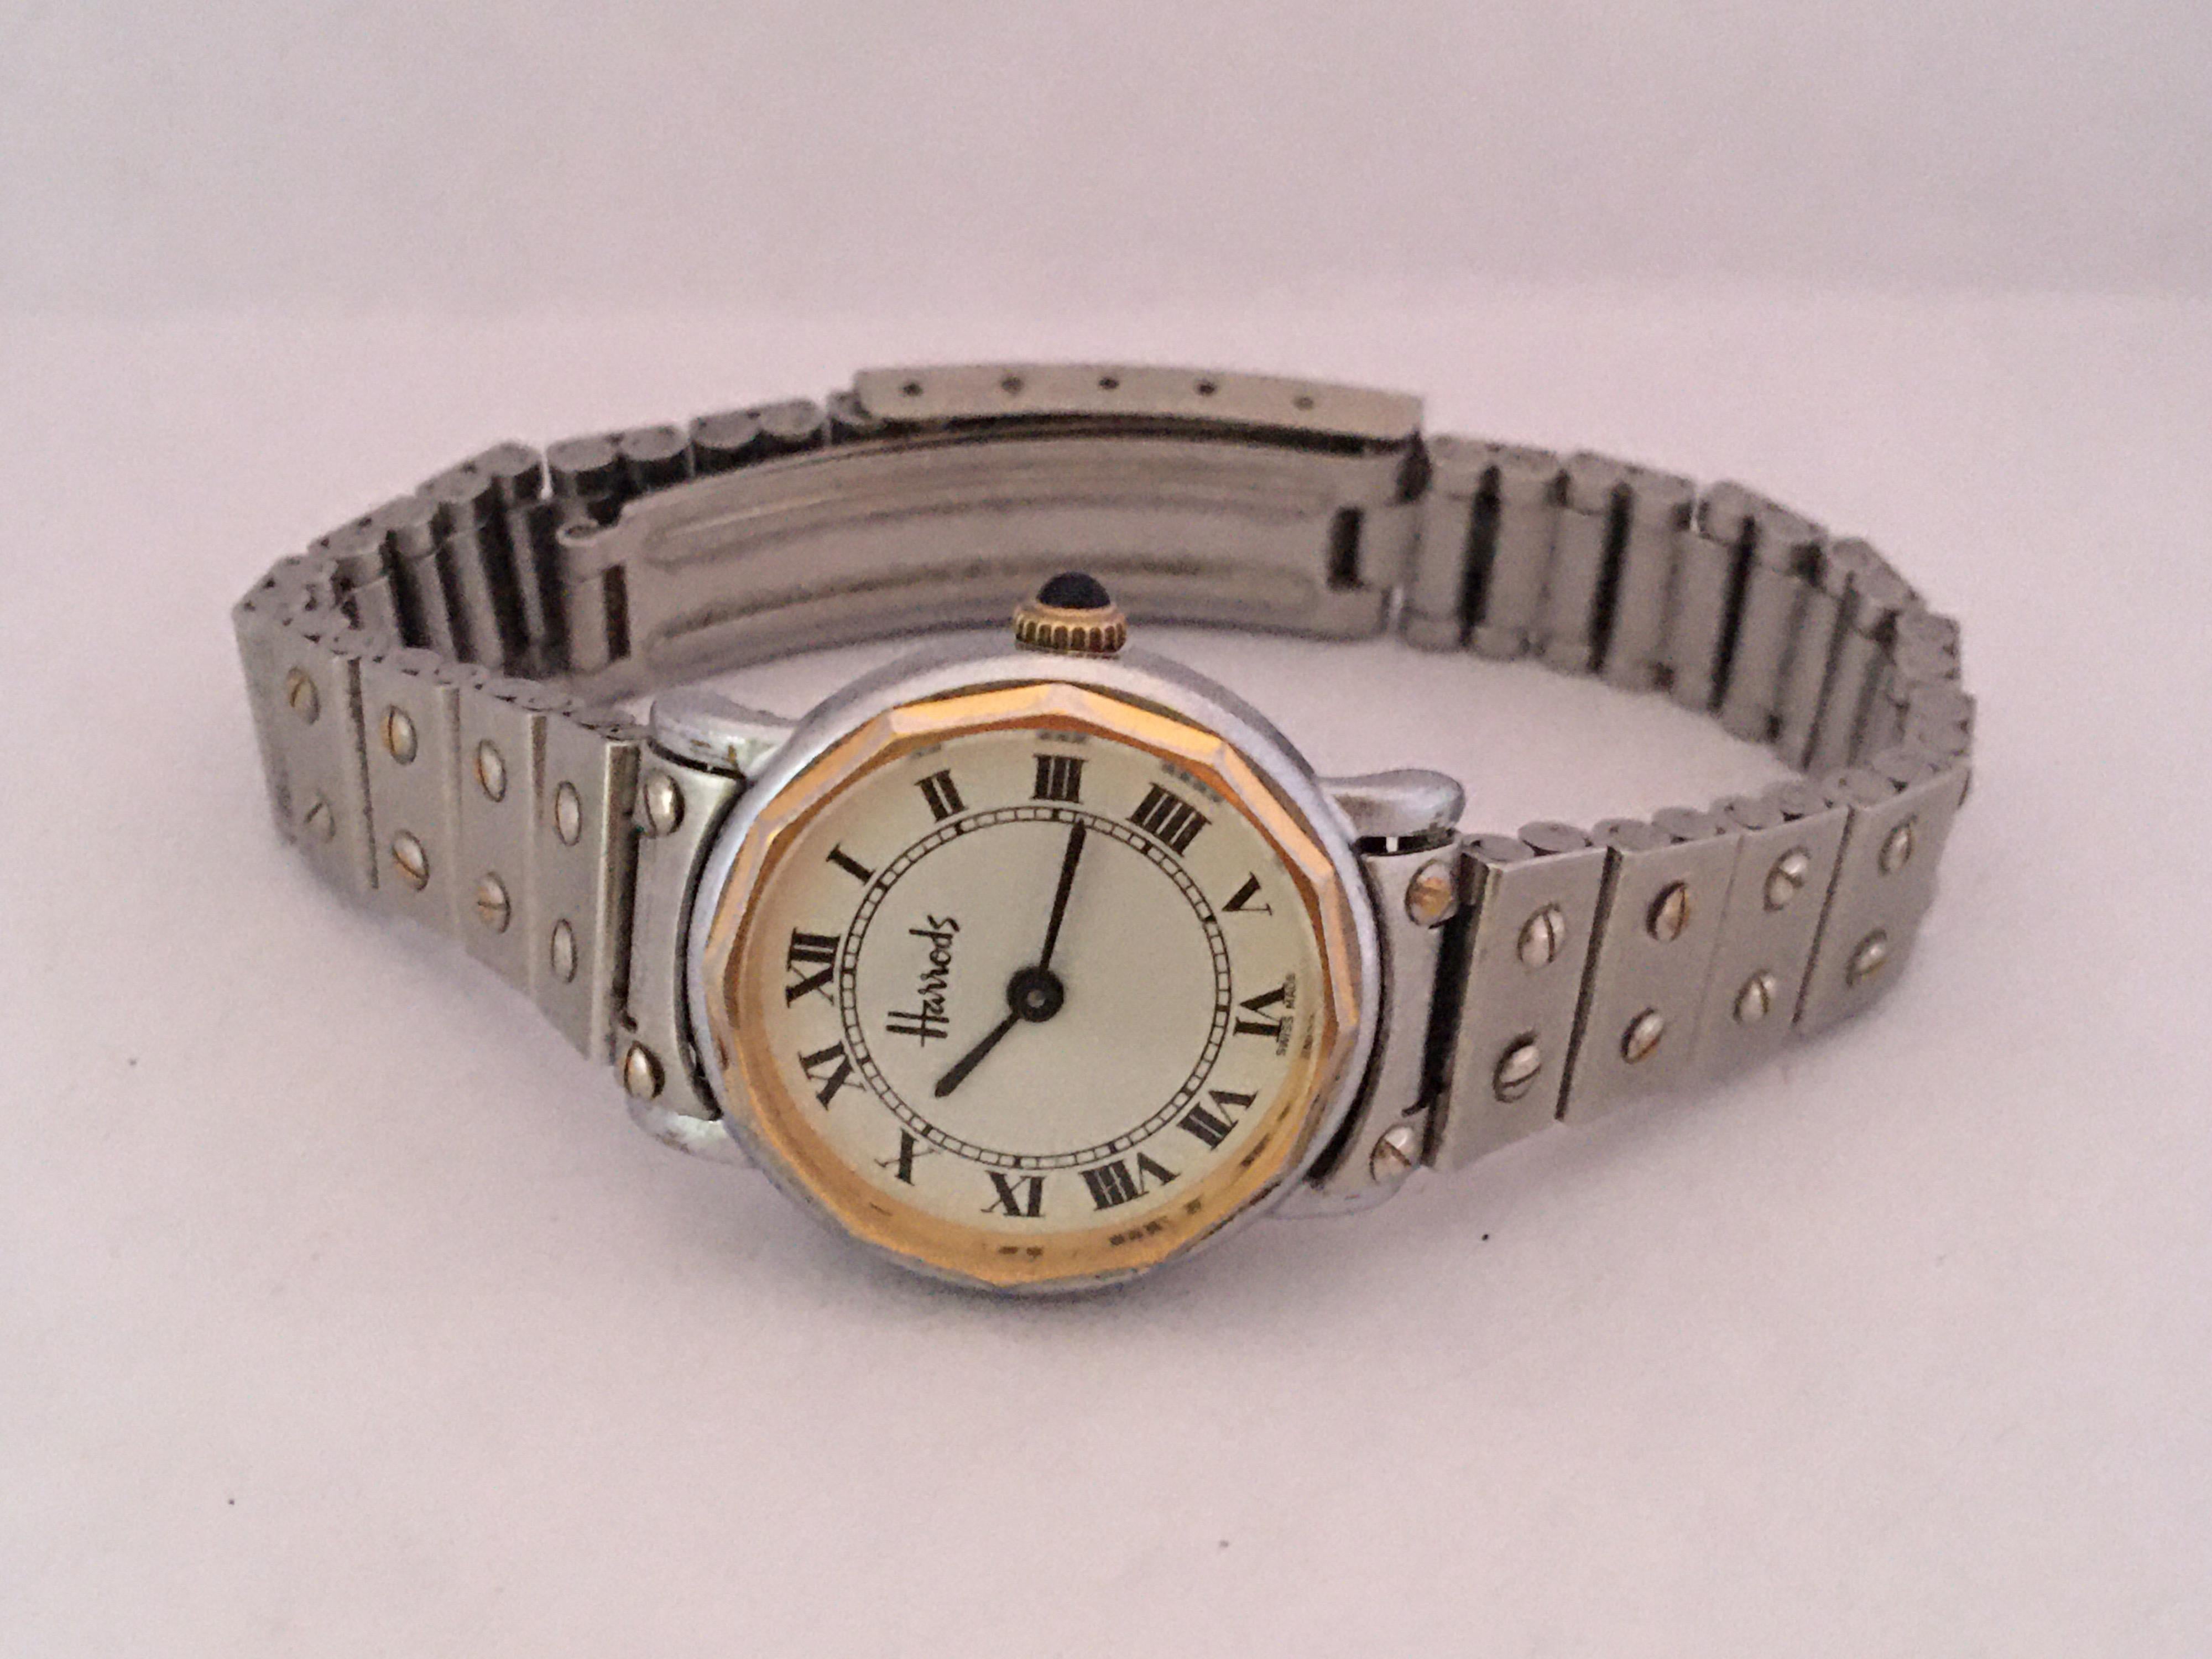 This beautiful 25mm Watch diameter vintage pre-owned hand winding ladies watch is in good working condition and it running well. Visible signs of ageing and wear with light scratches on the glass and on the watch case as shown. Some wear marks on